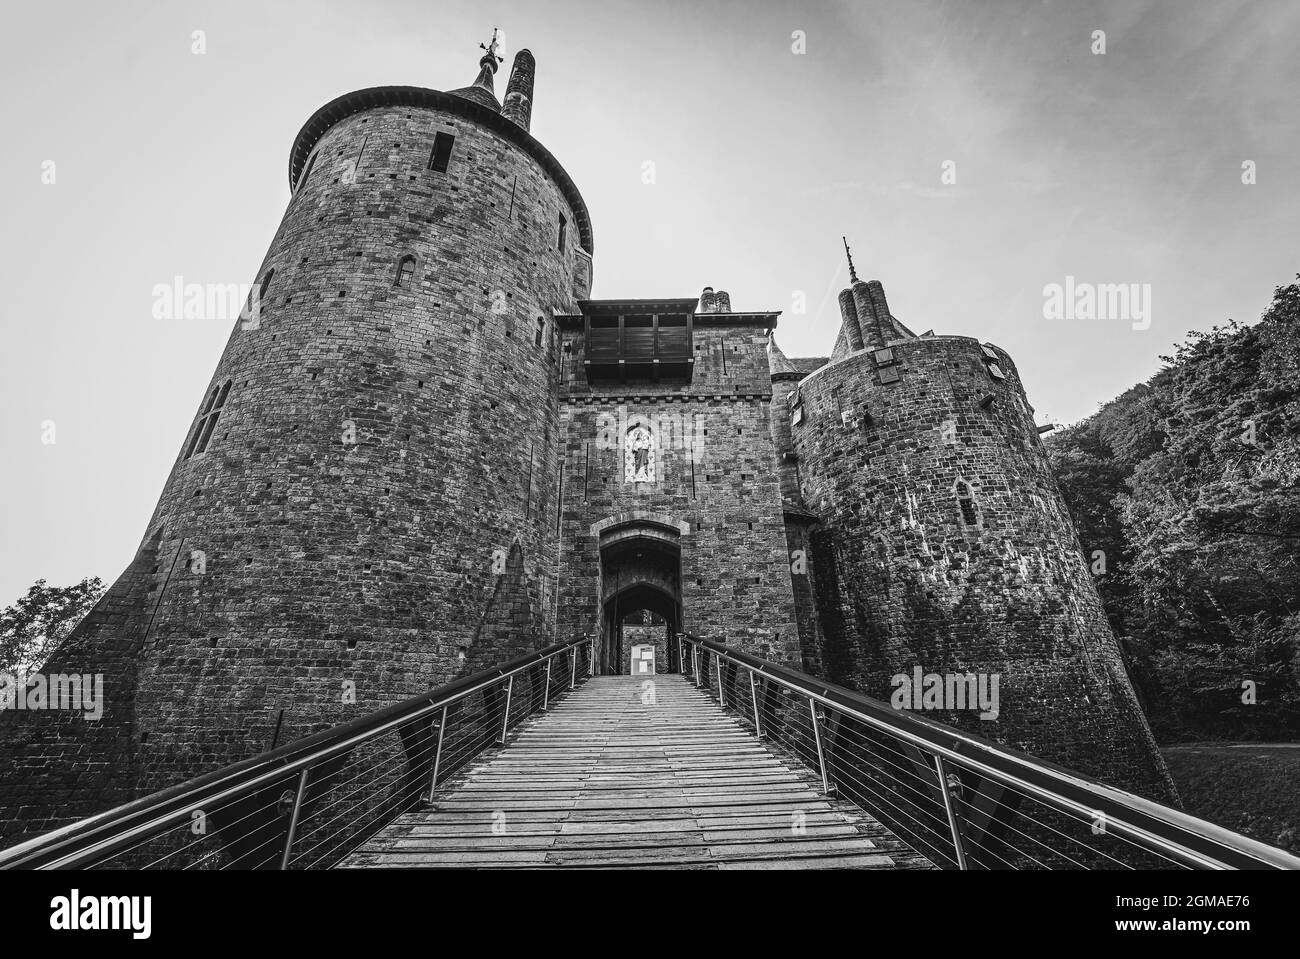 Castell Coch or the Red Castle in black and white. Cardiff, South Wales, the United Kingdom - September 15, 2021 Stock Photo